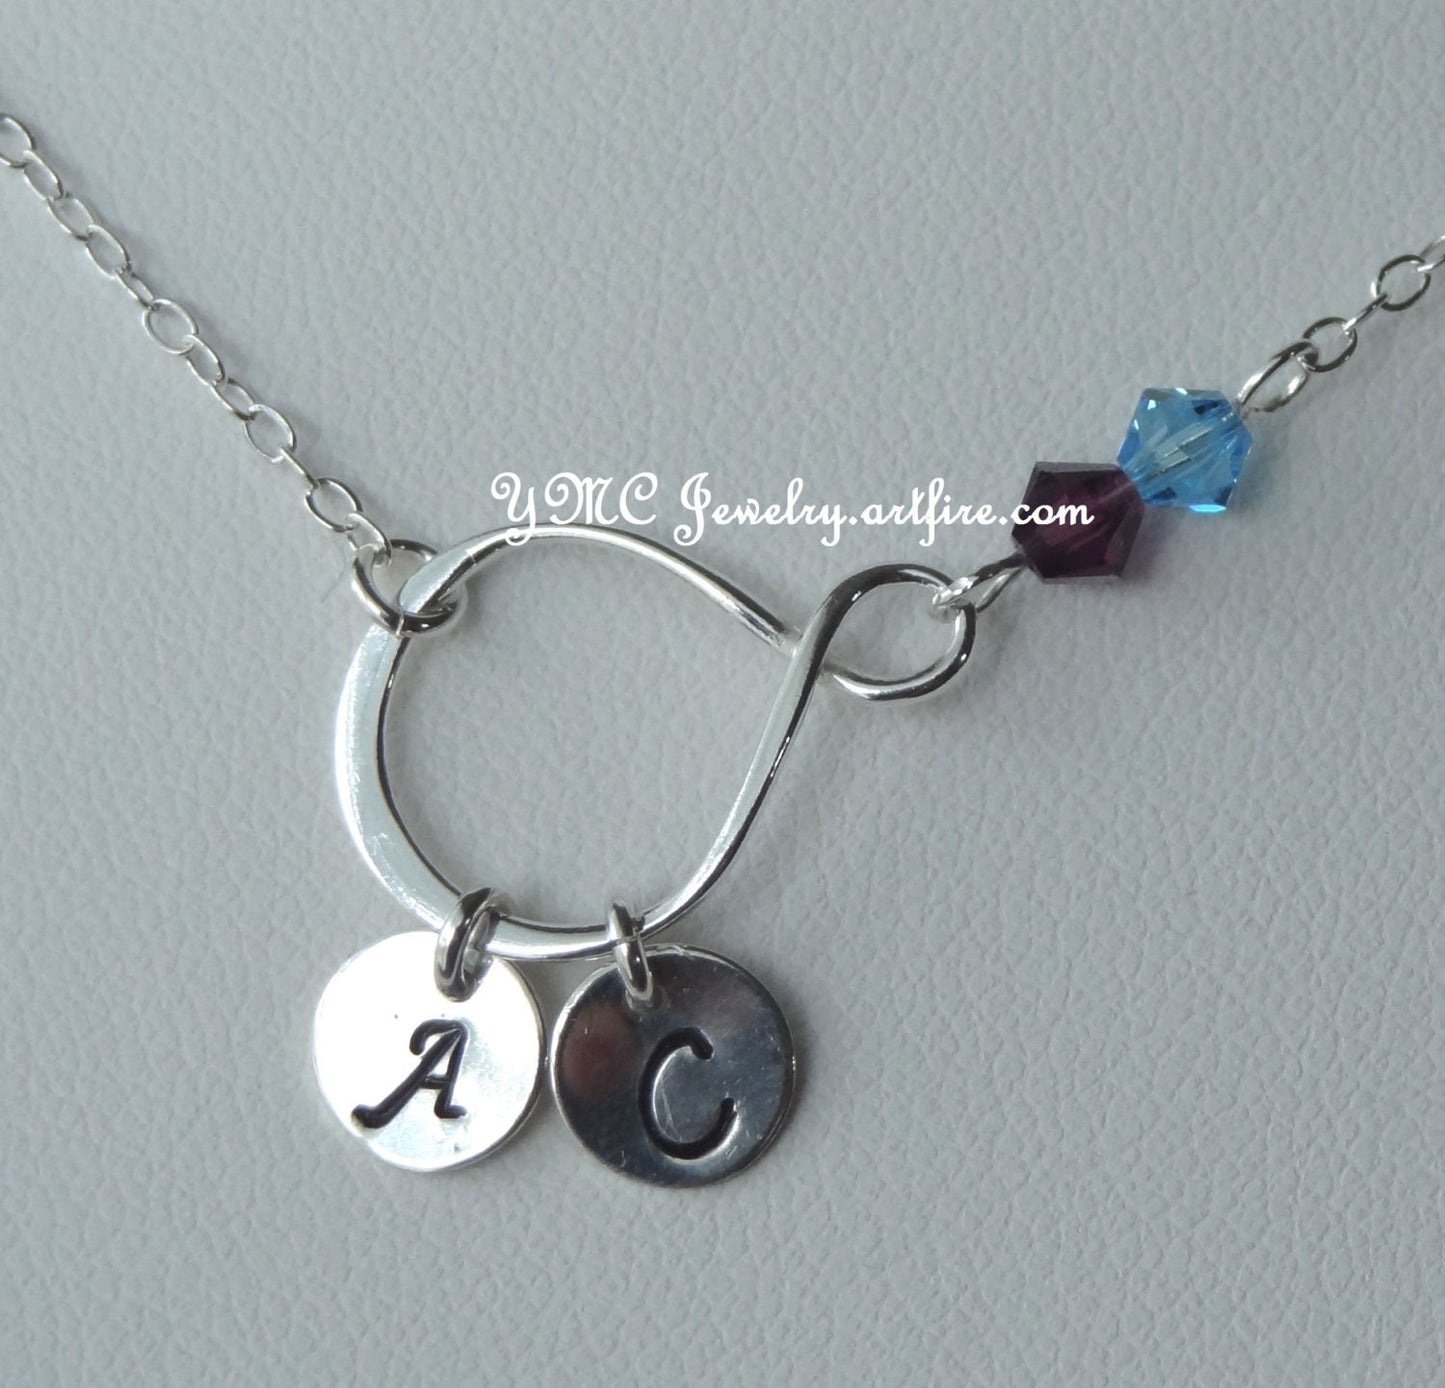 Sterling Silver Infinity Necklace,Initial, Birthstone Necklace,Family Necklace,Family Birthstone Infinity Necklace,Infinity Necklace,Grandma